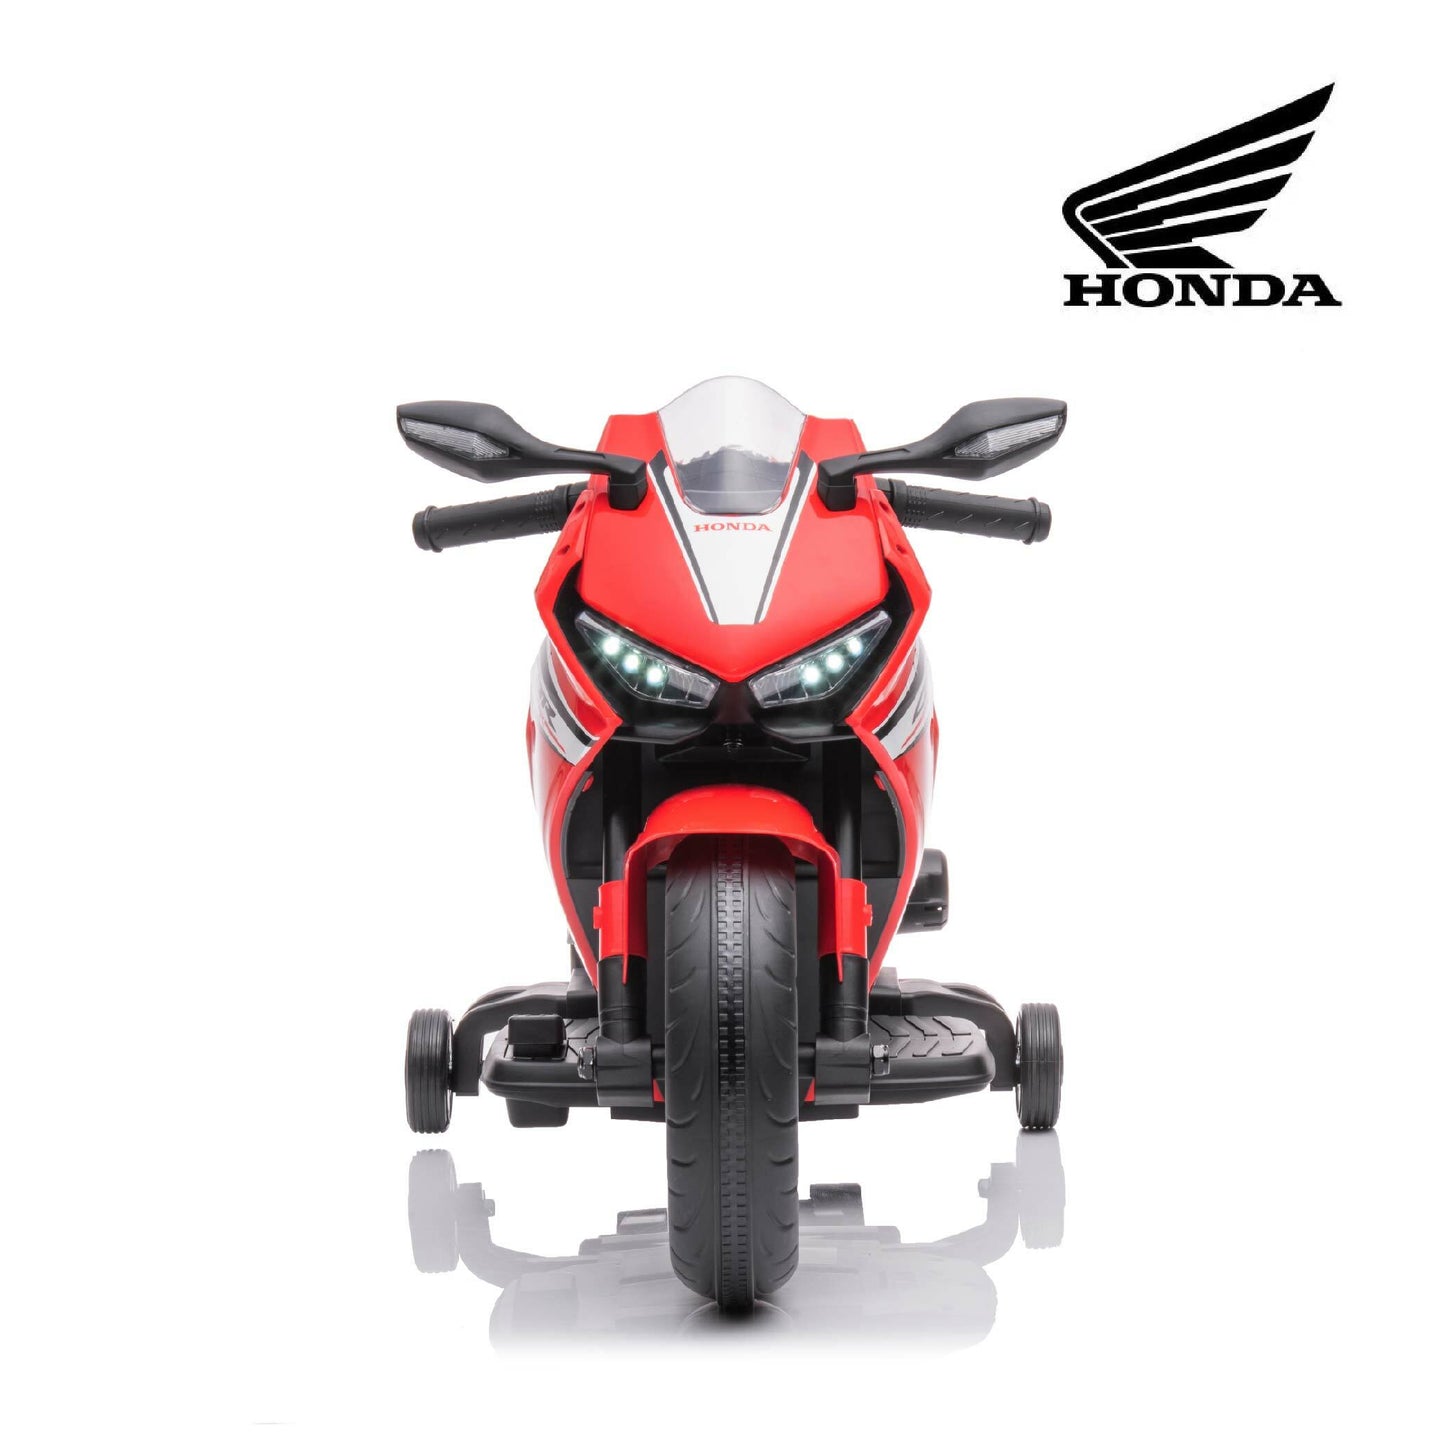 【HONDA】CBR1000RR electric toy car - 2 colors available